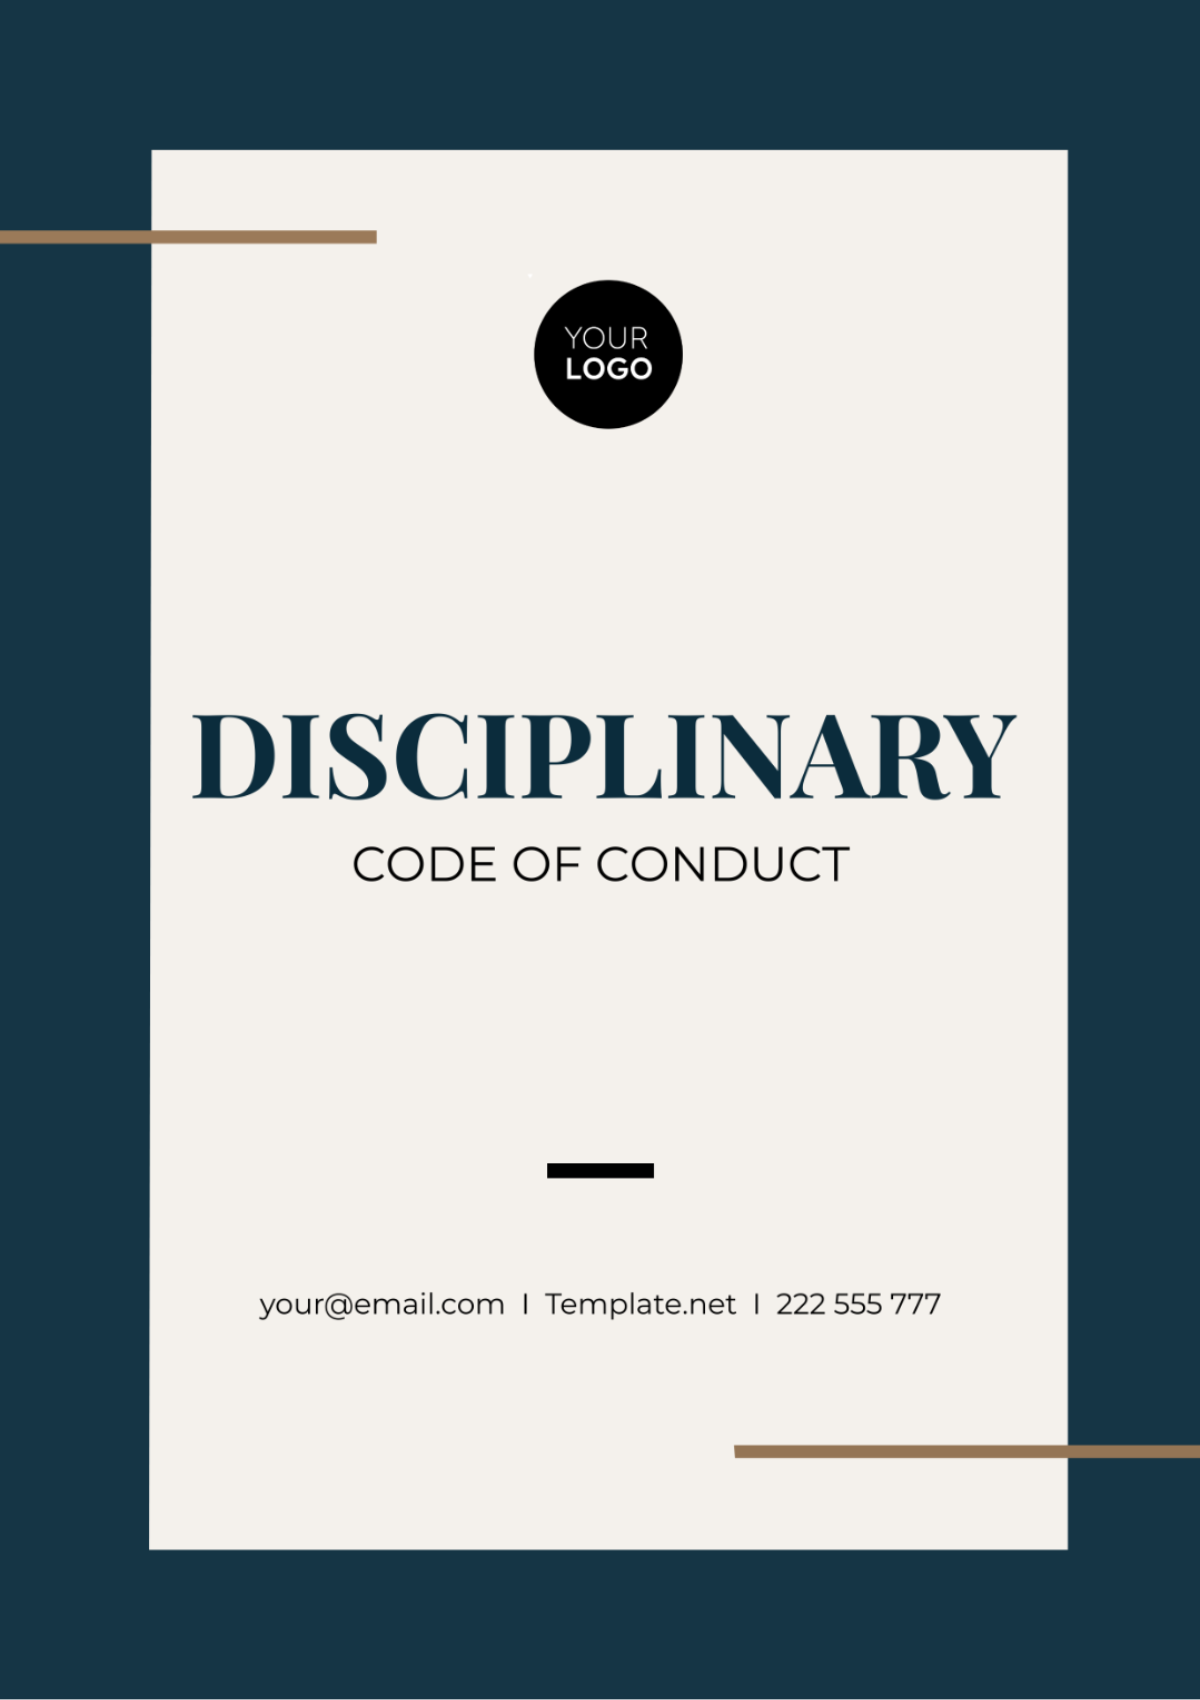 Disciplinary Code of Conduct Template